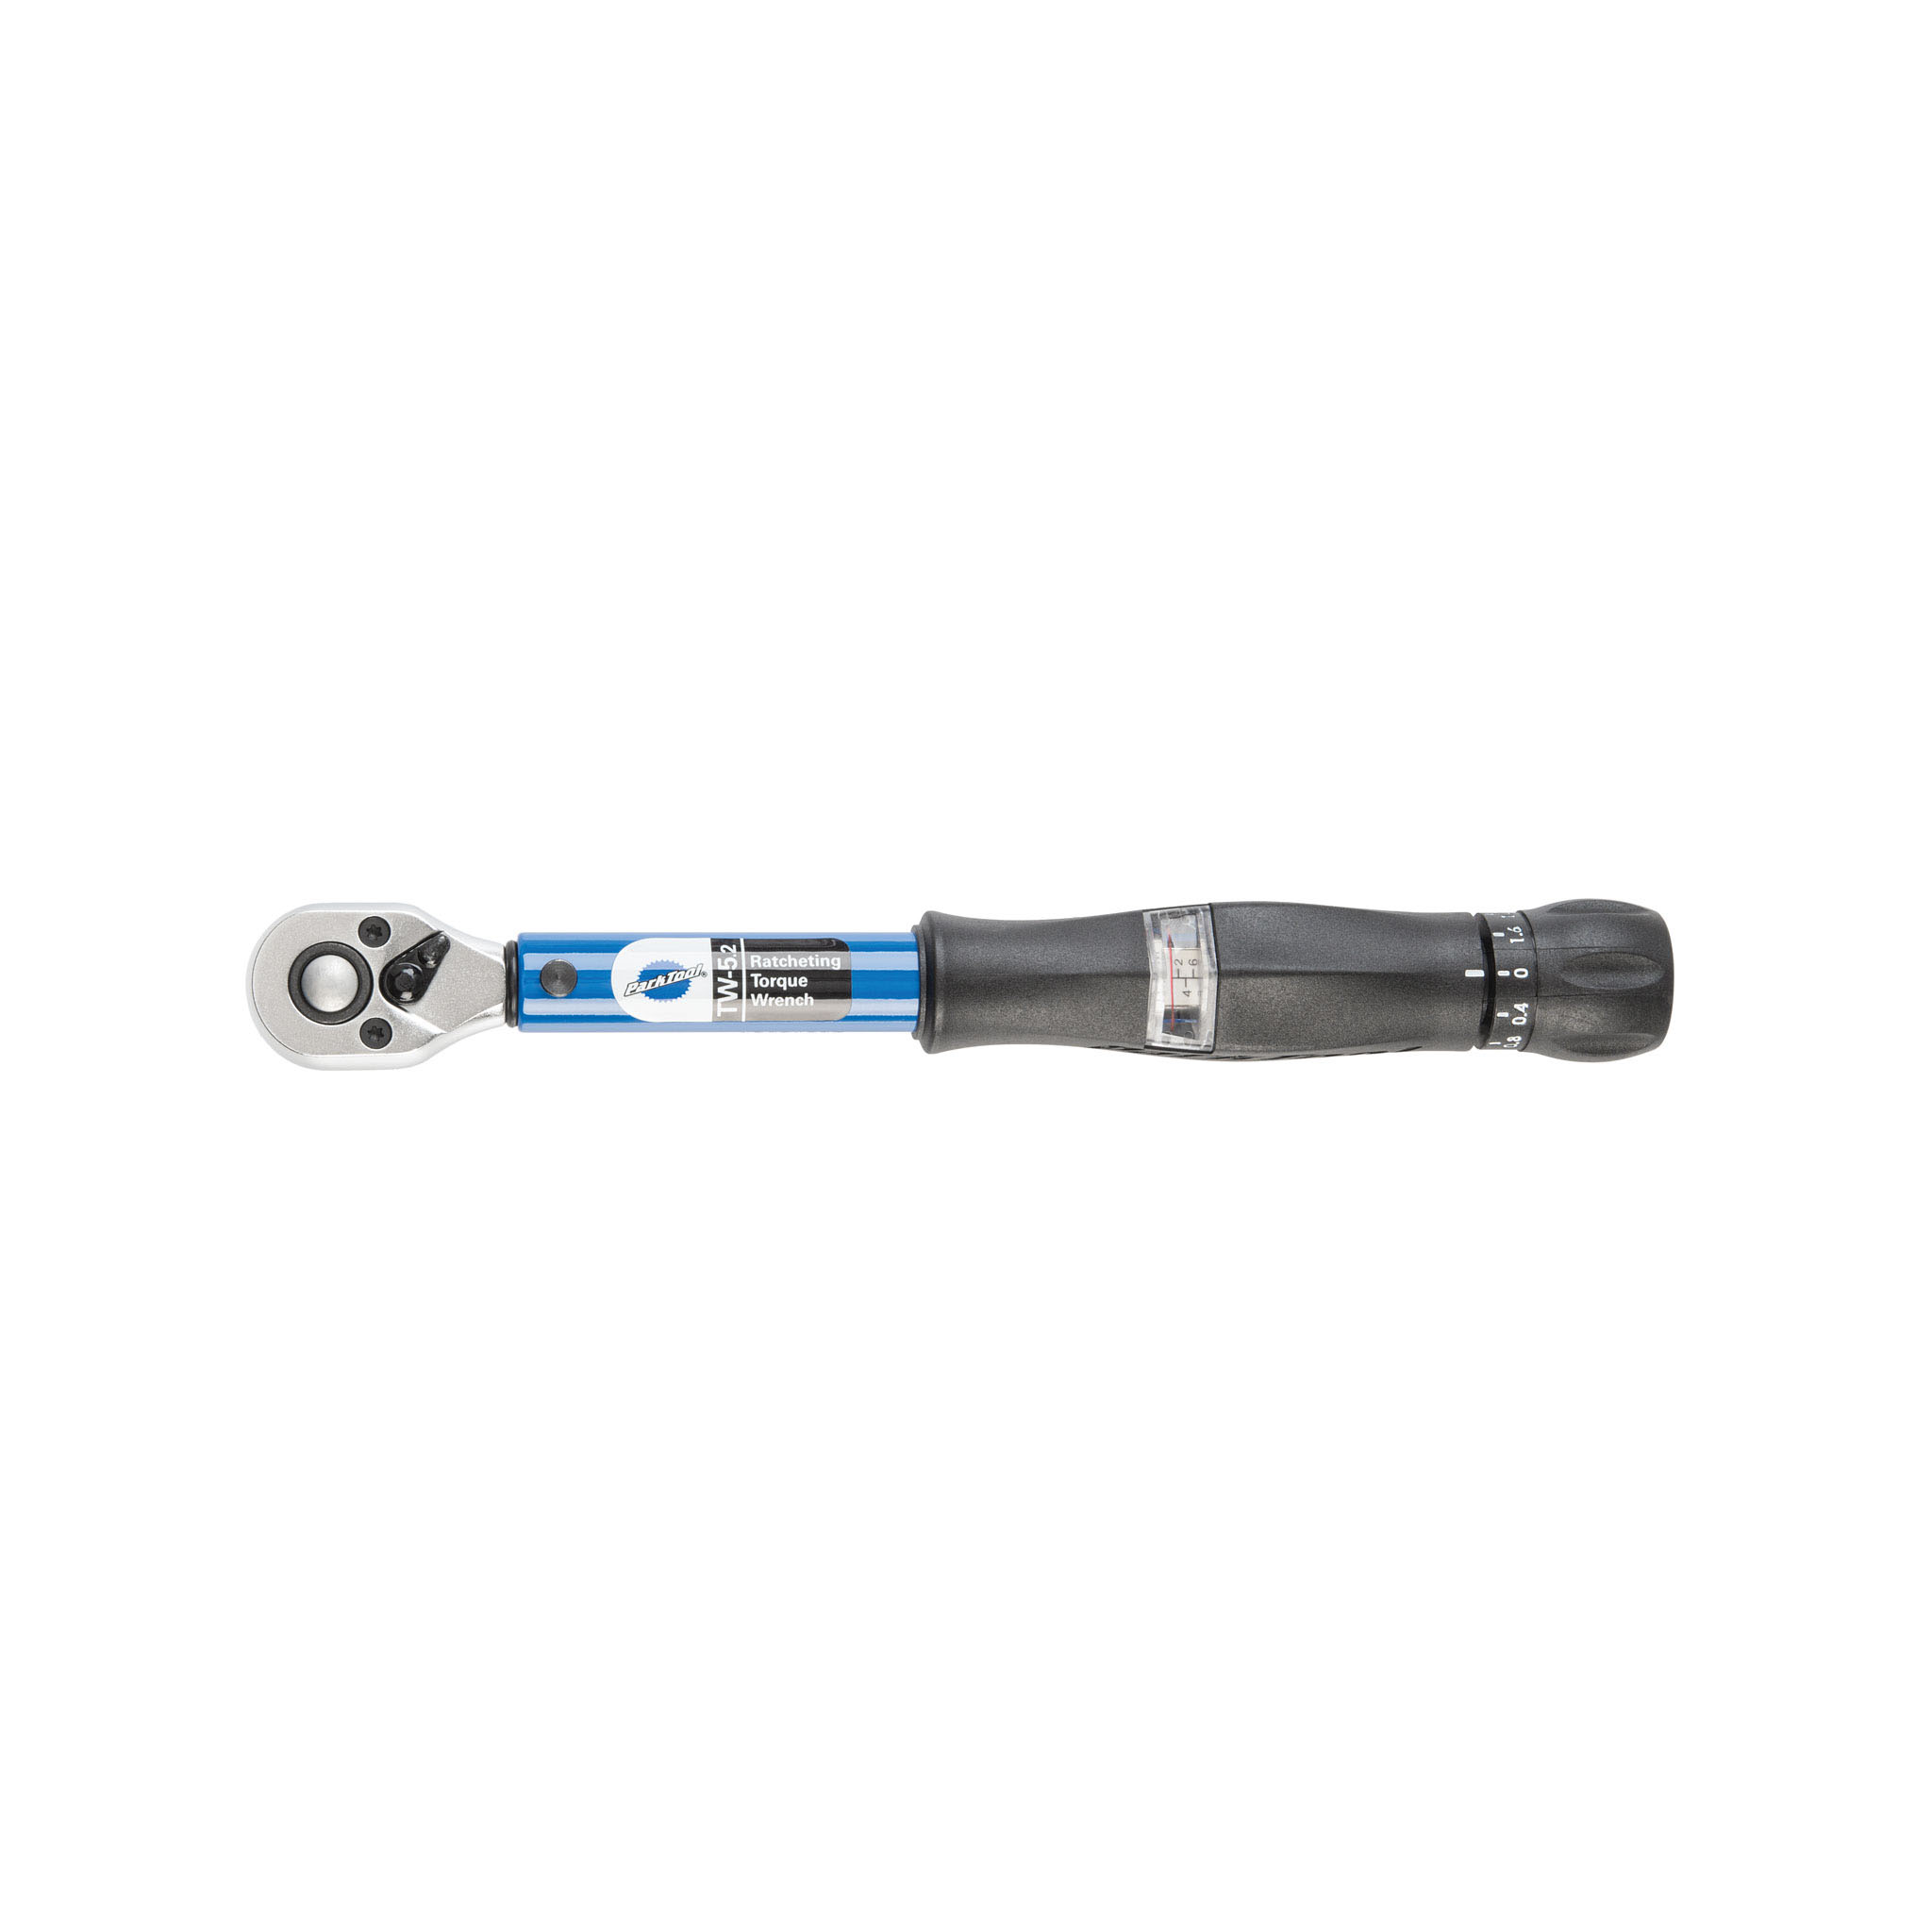 Park Tool Ratcheting Torque Wrench TW-5.2, 3/8", 2-14 Nm